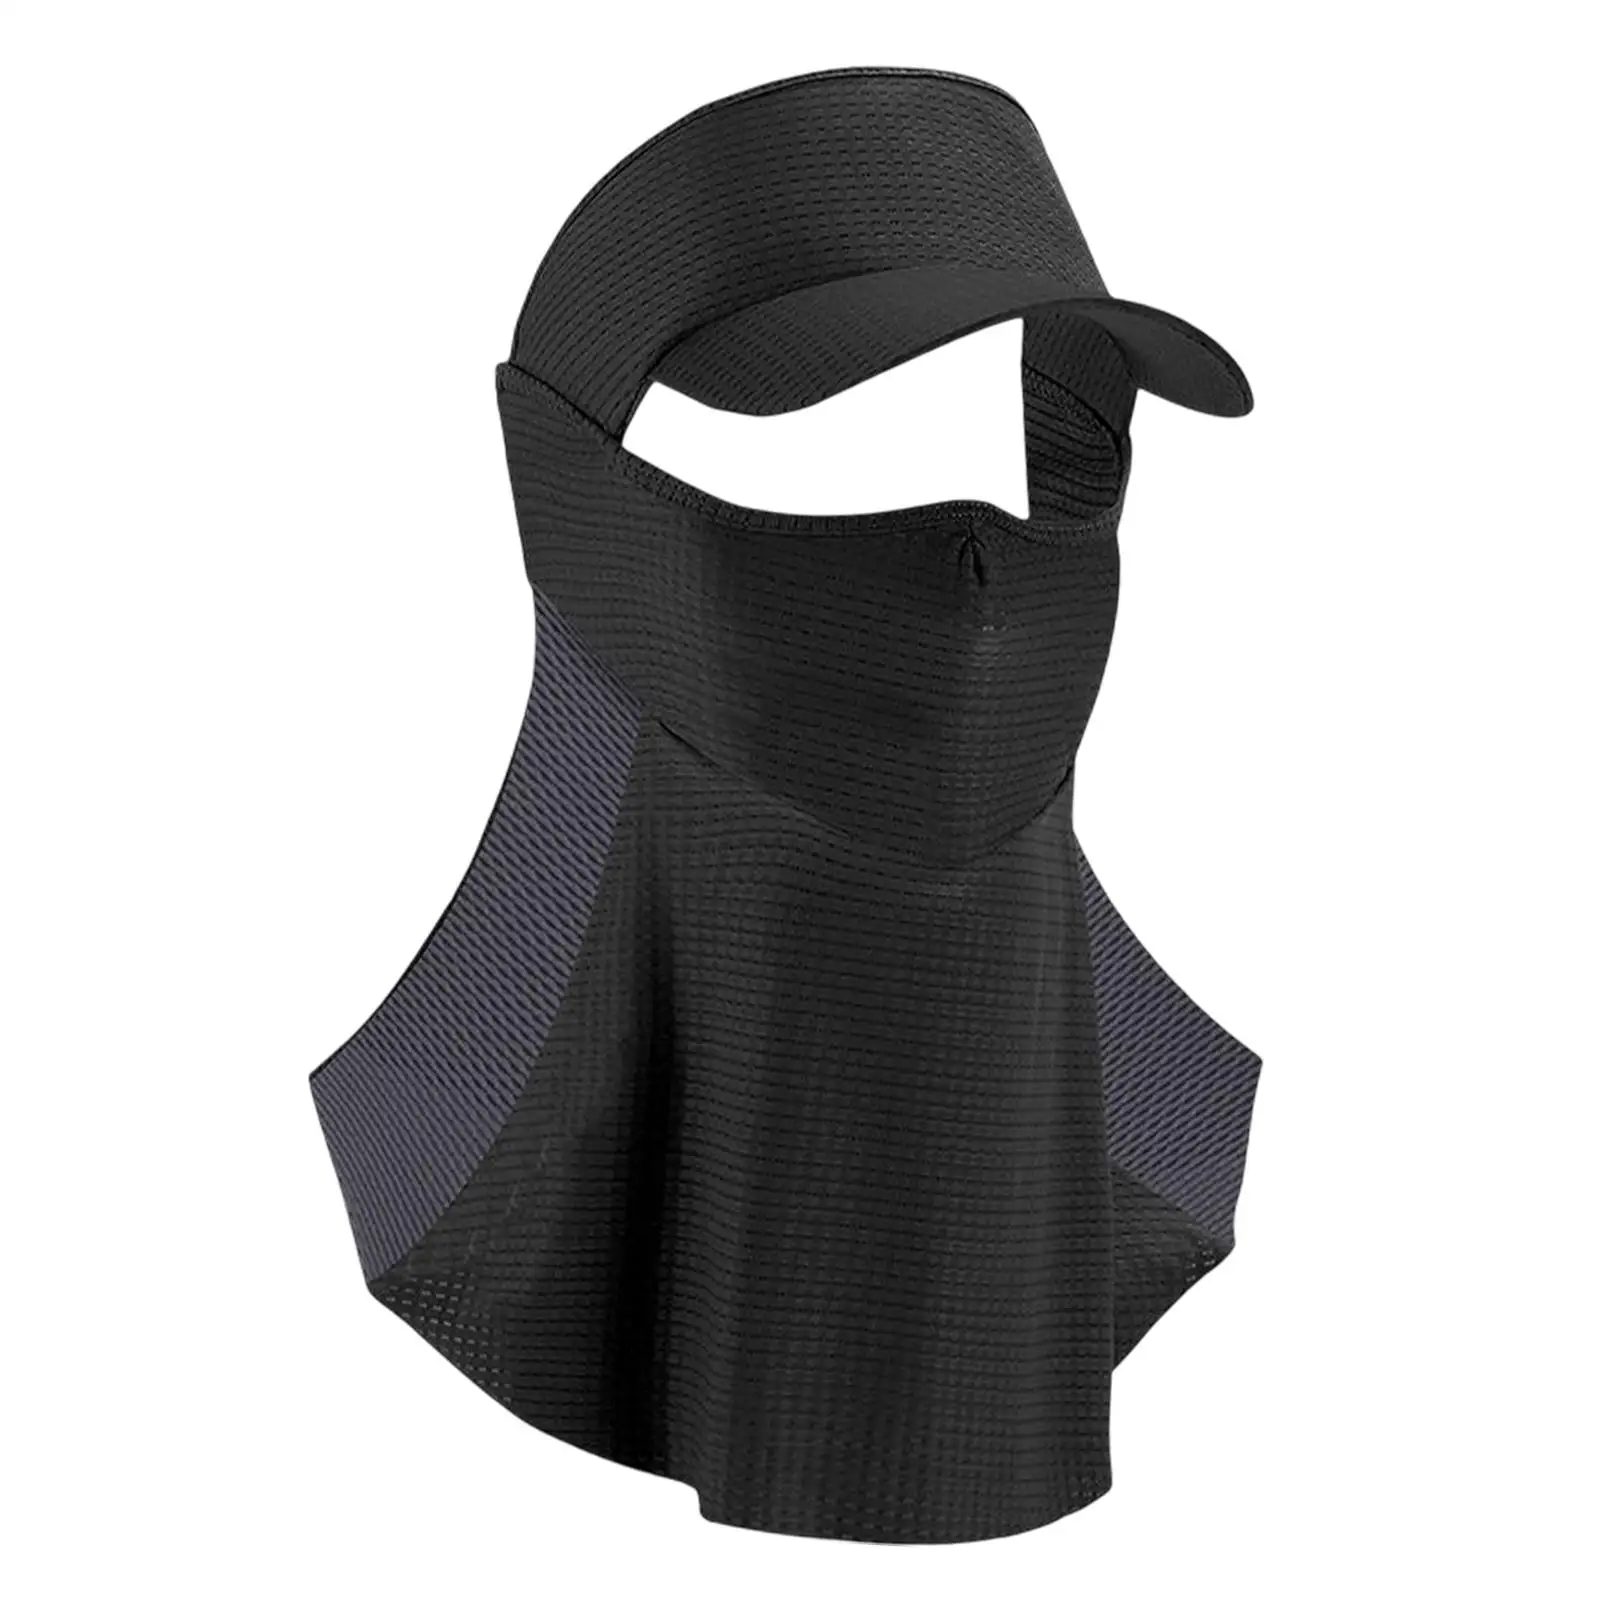 Sunshade Protection Gaiter Face Scarf for Gift Landscaping Camping